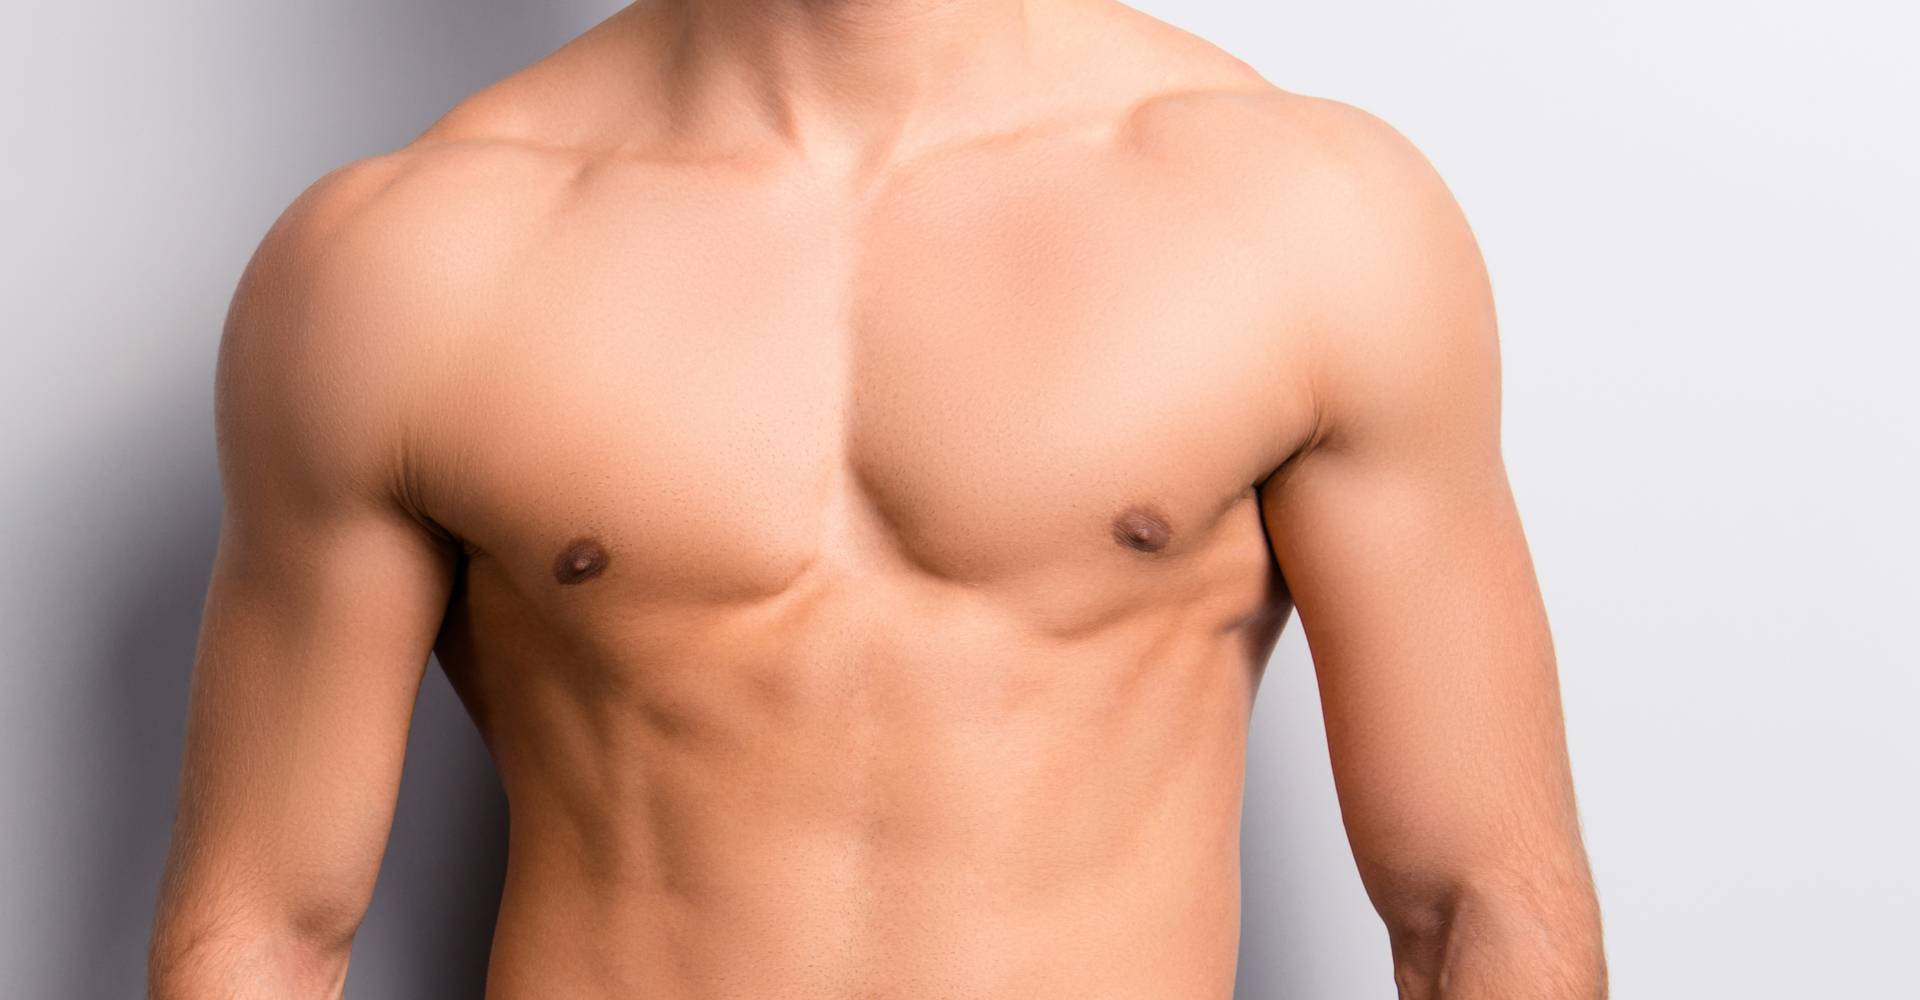 Skin Excess Gynecomastia Weight Fluctuation, Aging